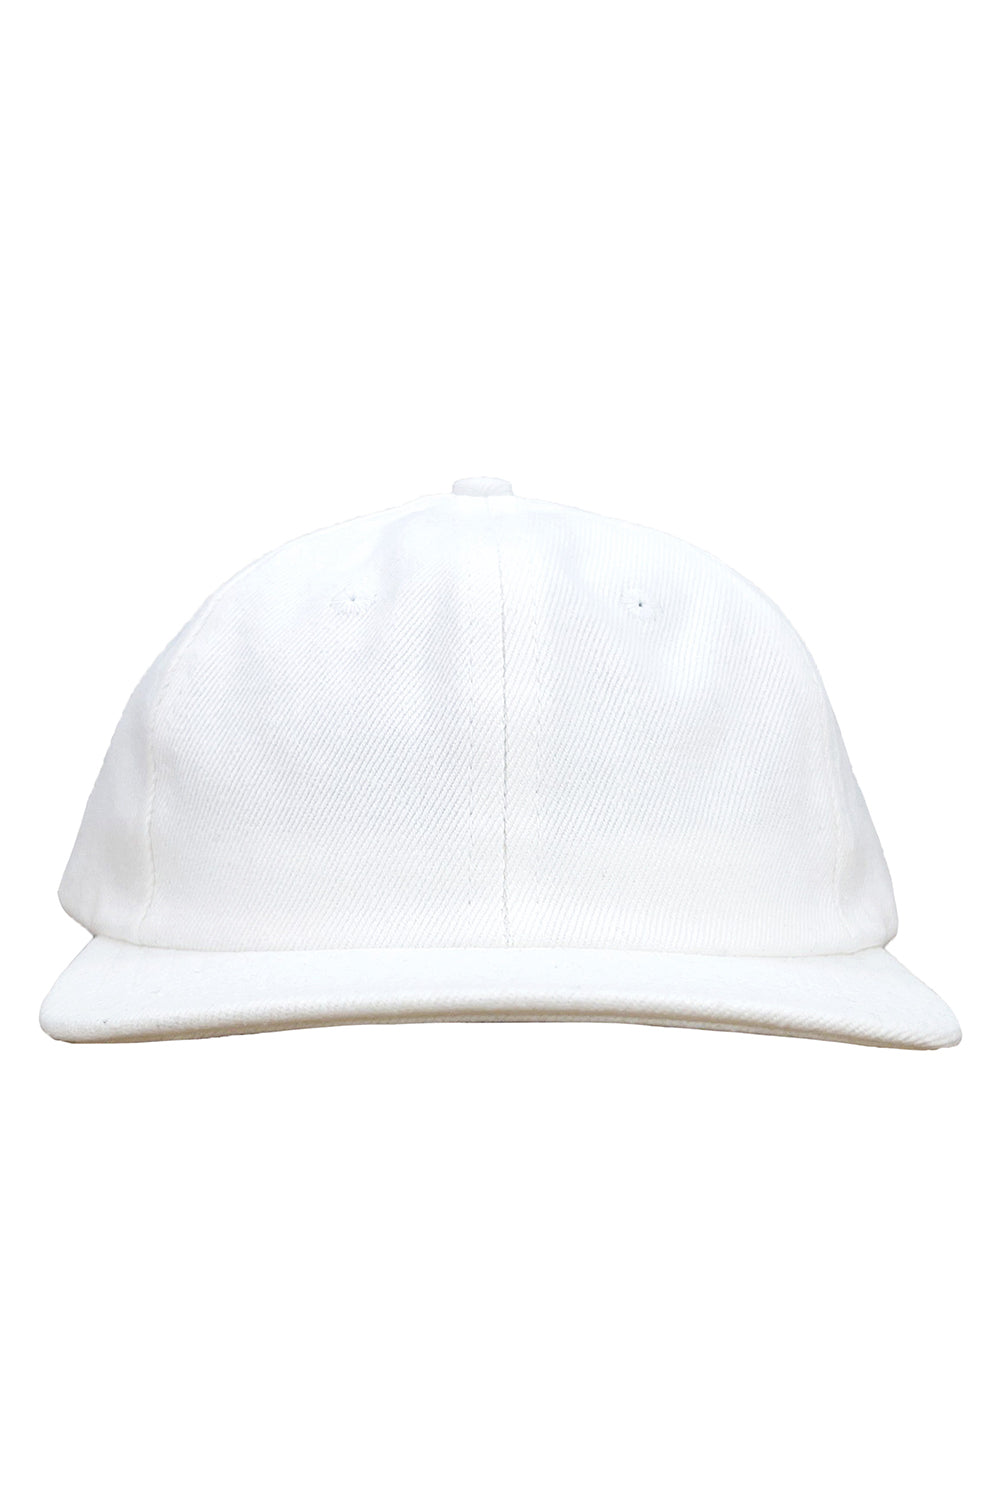 Chenga Twill Cap | Jungmaven Hemp Clothing & Accessories / Color: Washed White